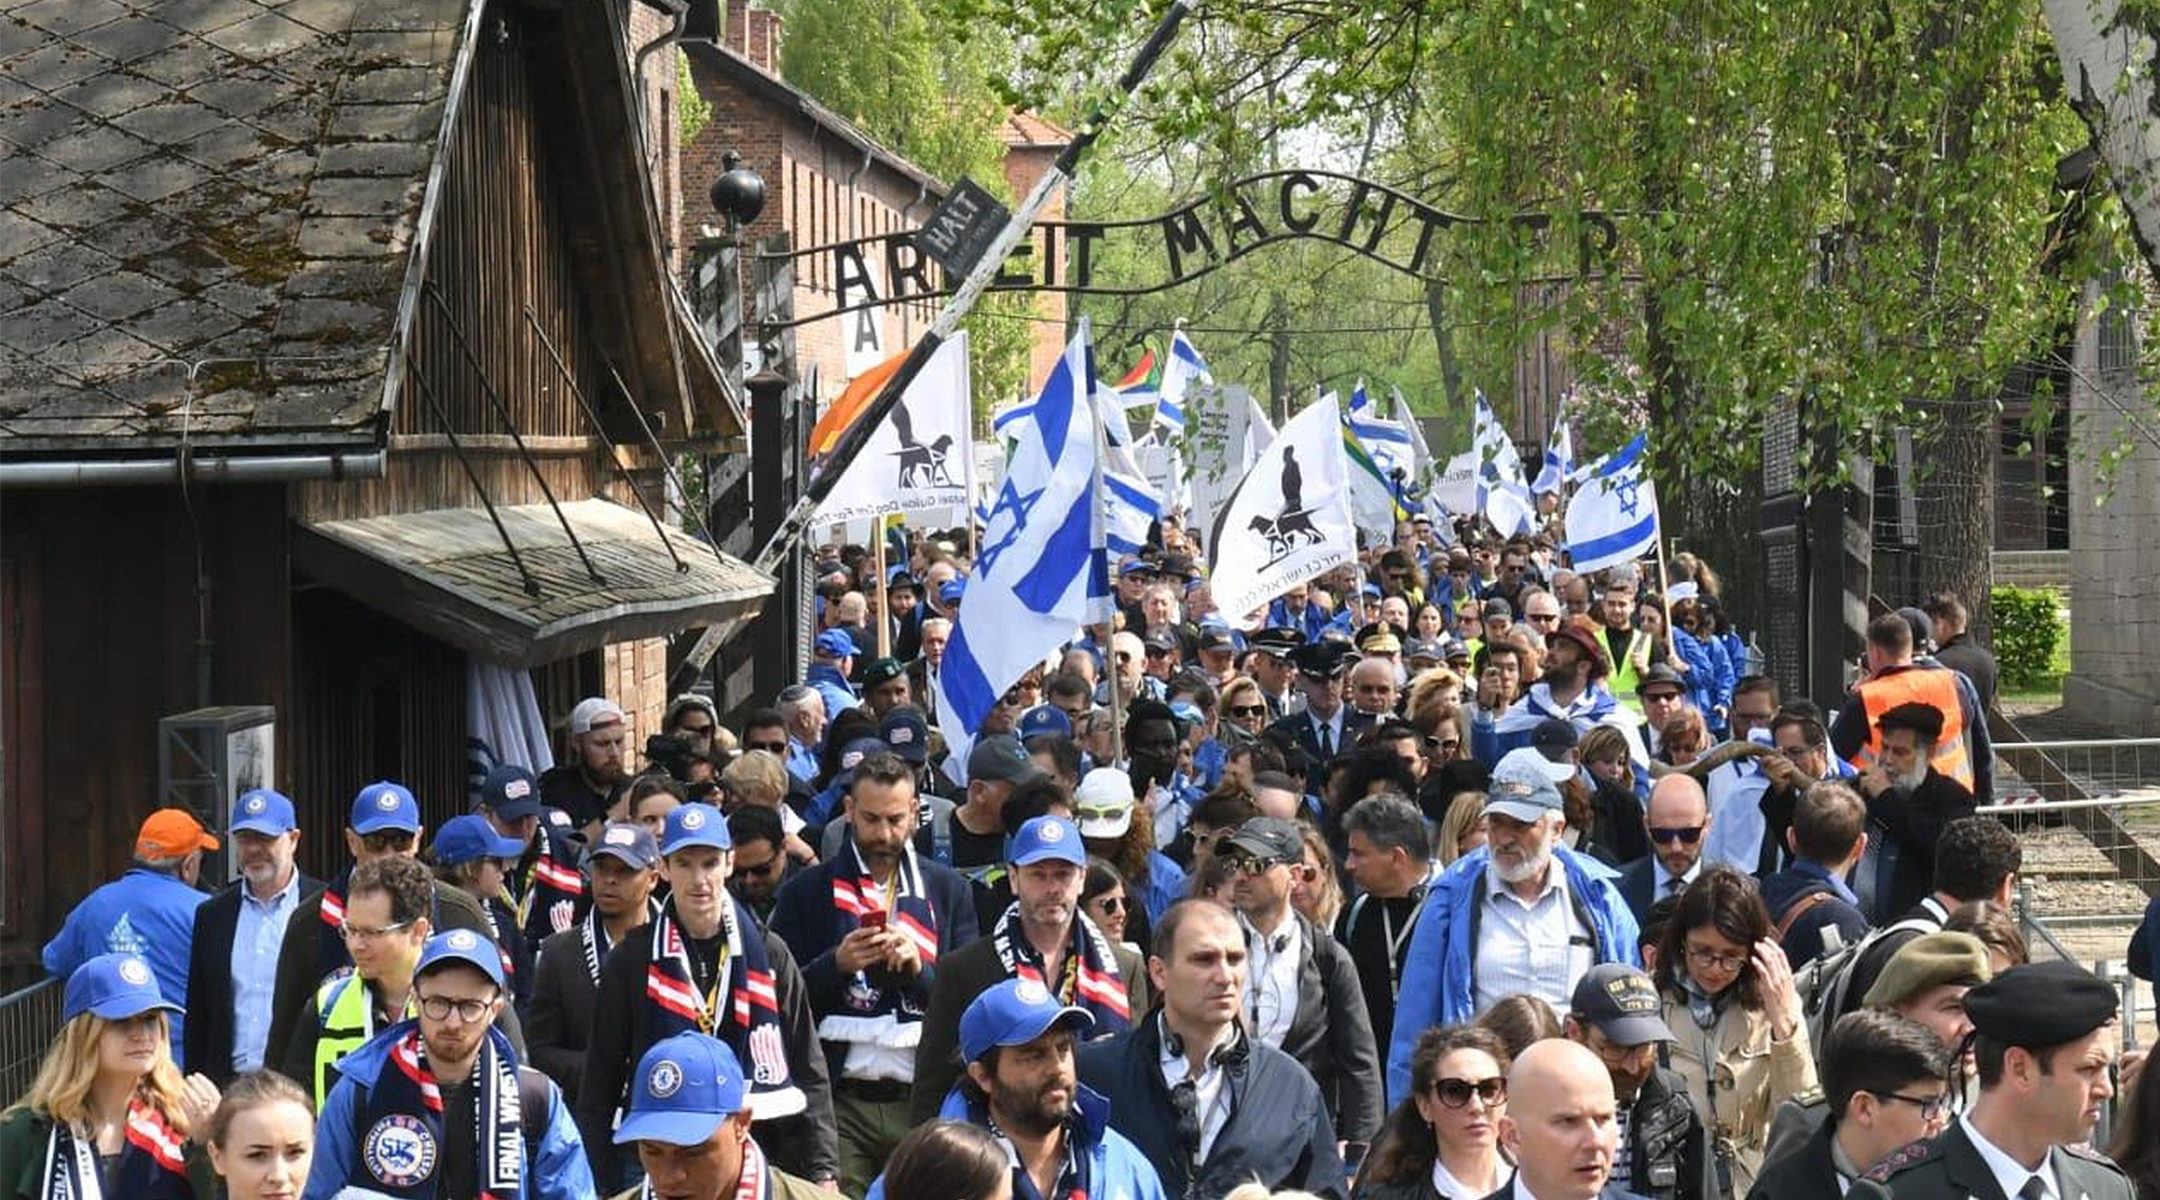 Participants of the March of the Living event exiting a gate in the former Nazi camp Auschwitz in Poland, May 2, 2019. (Courtesy of the International March of the Living)